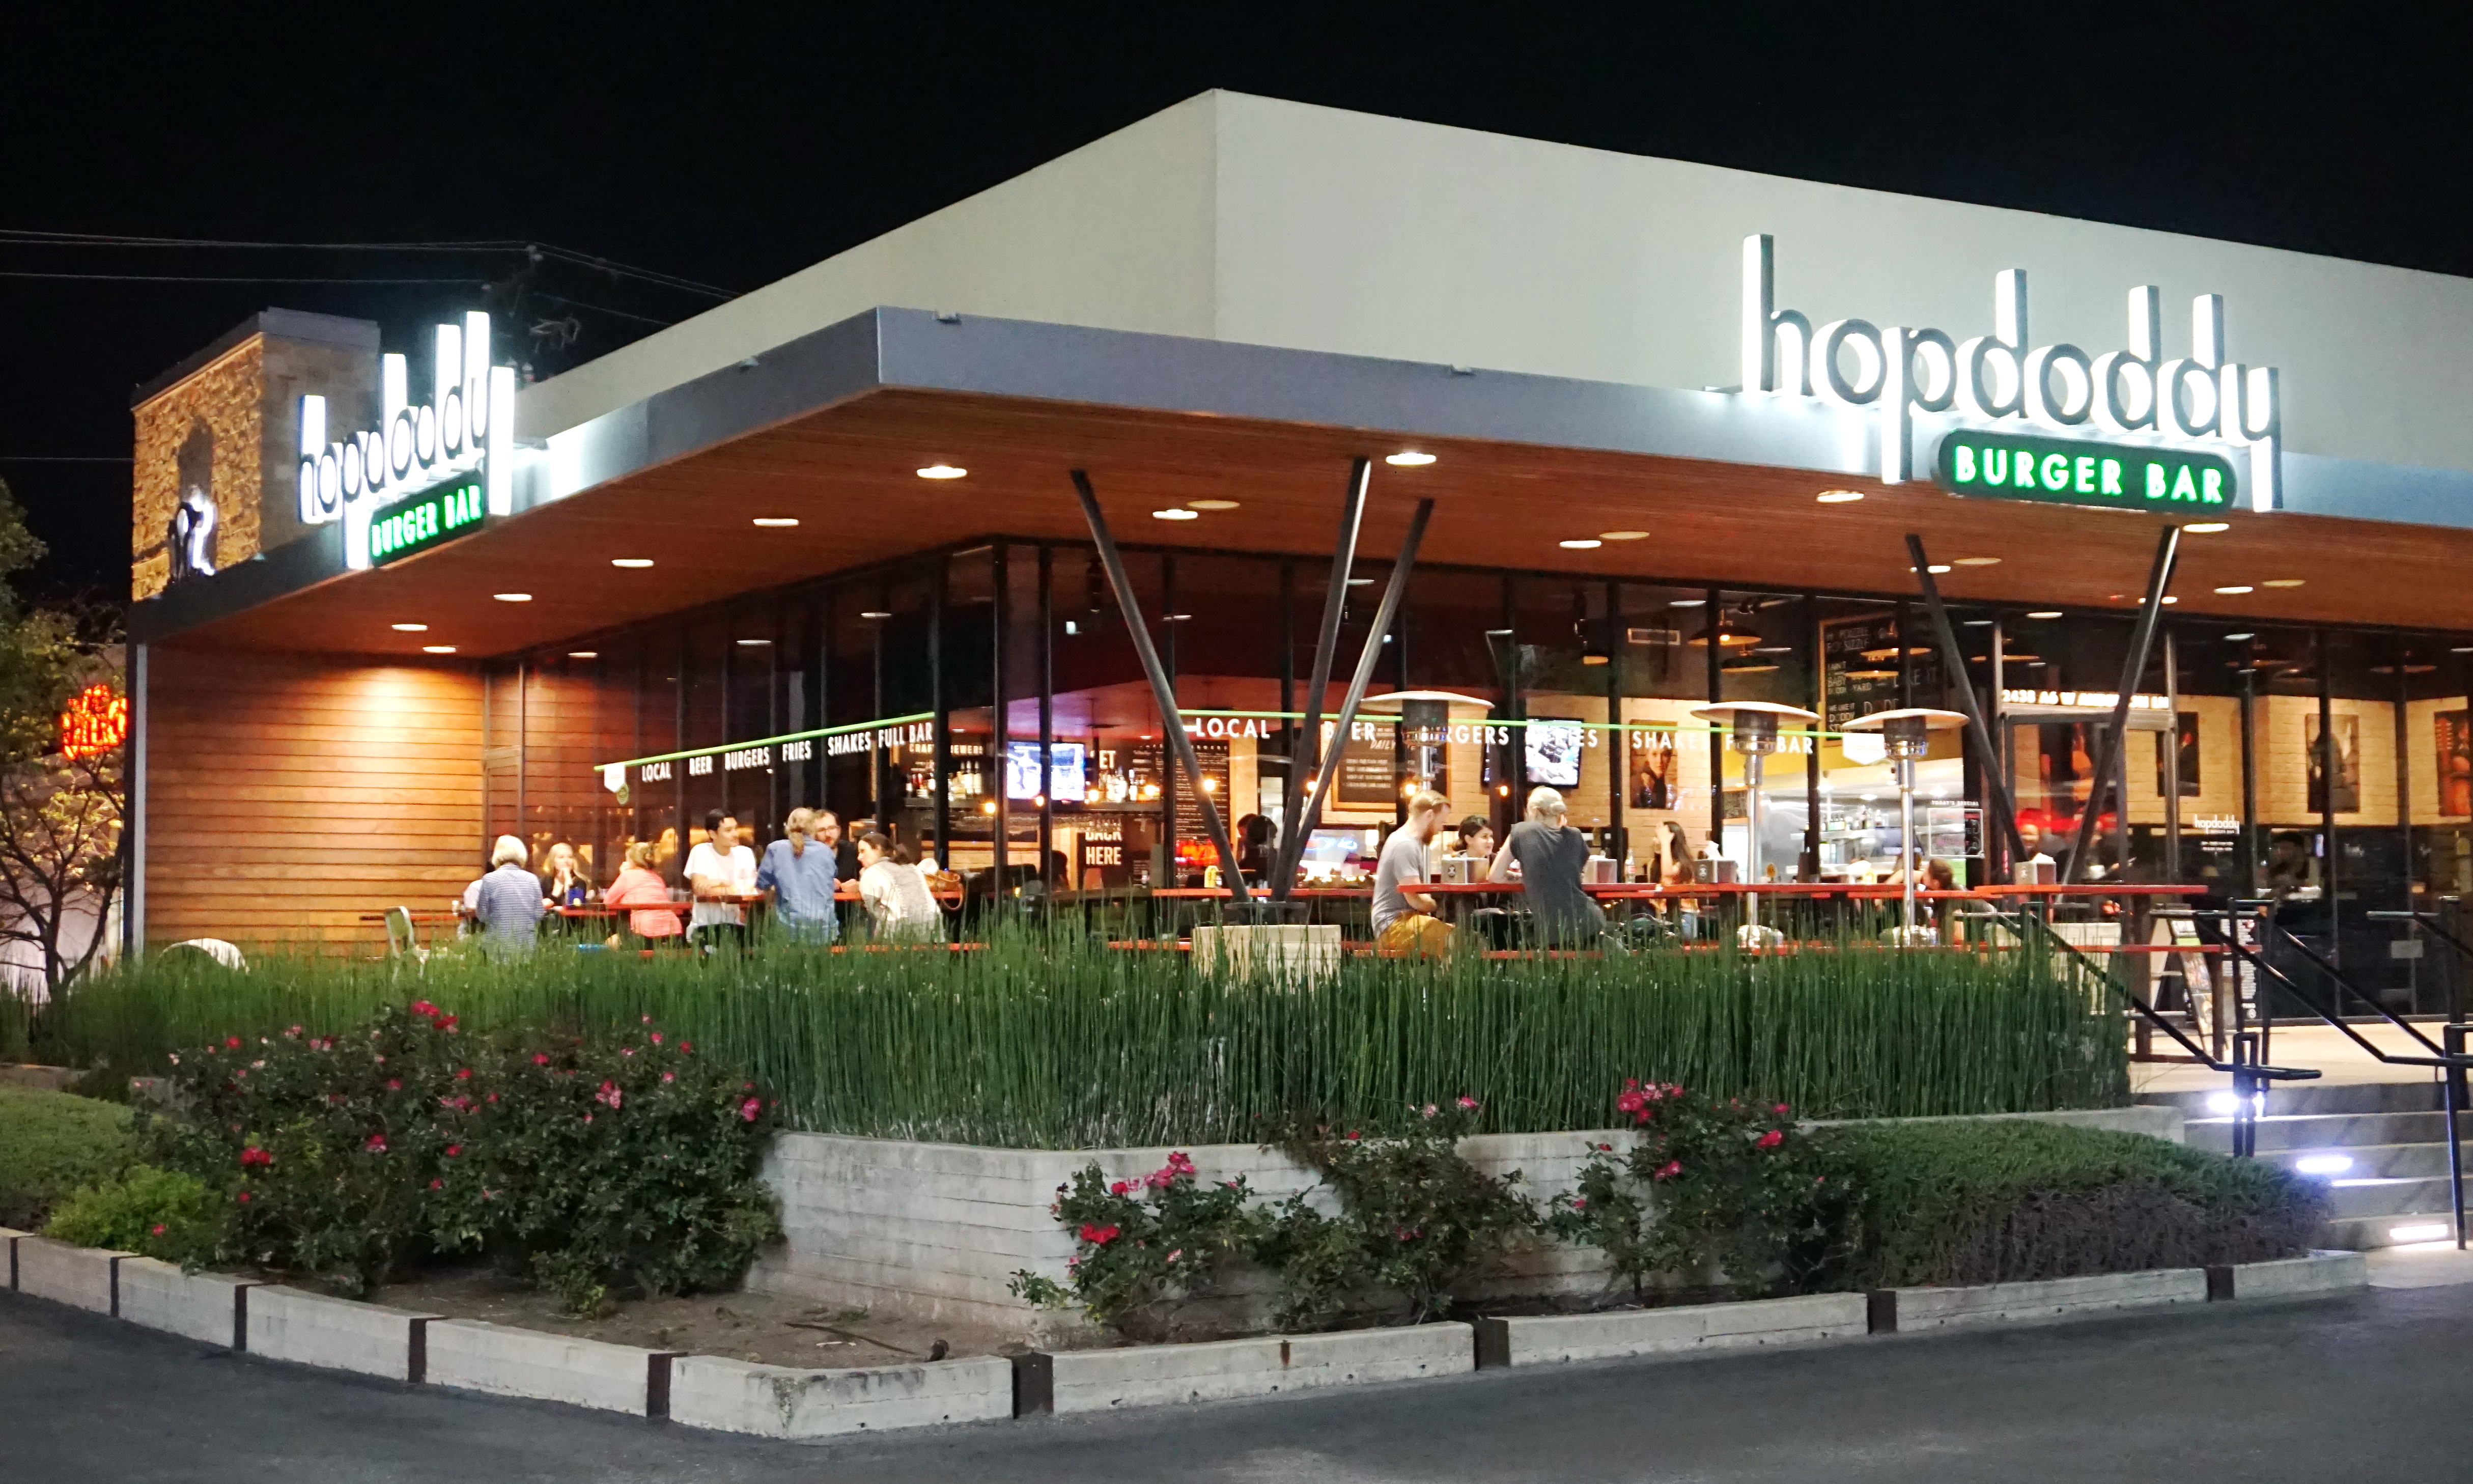 Hopdoddy Burger Bar Building in Austin Texas designed by Way Consulting Engineers